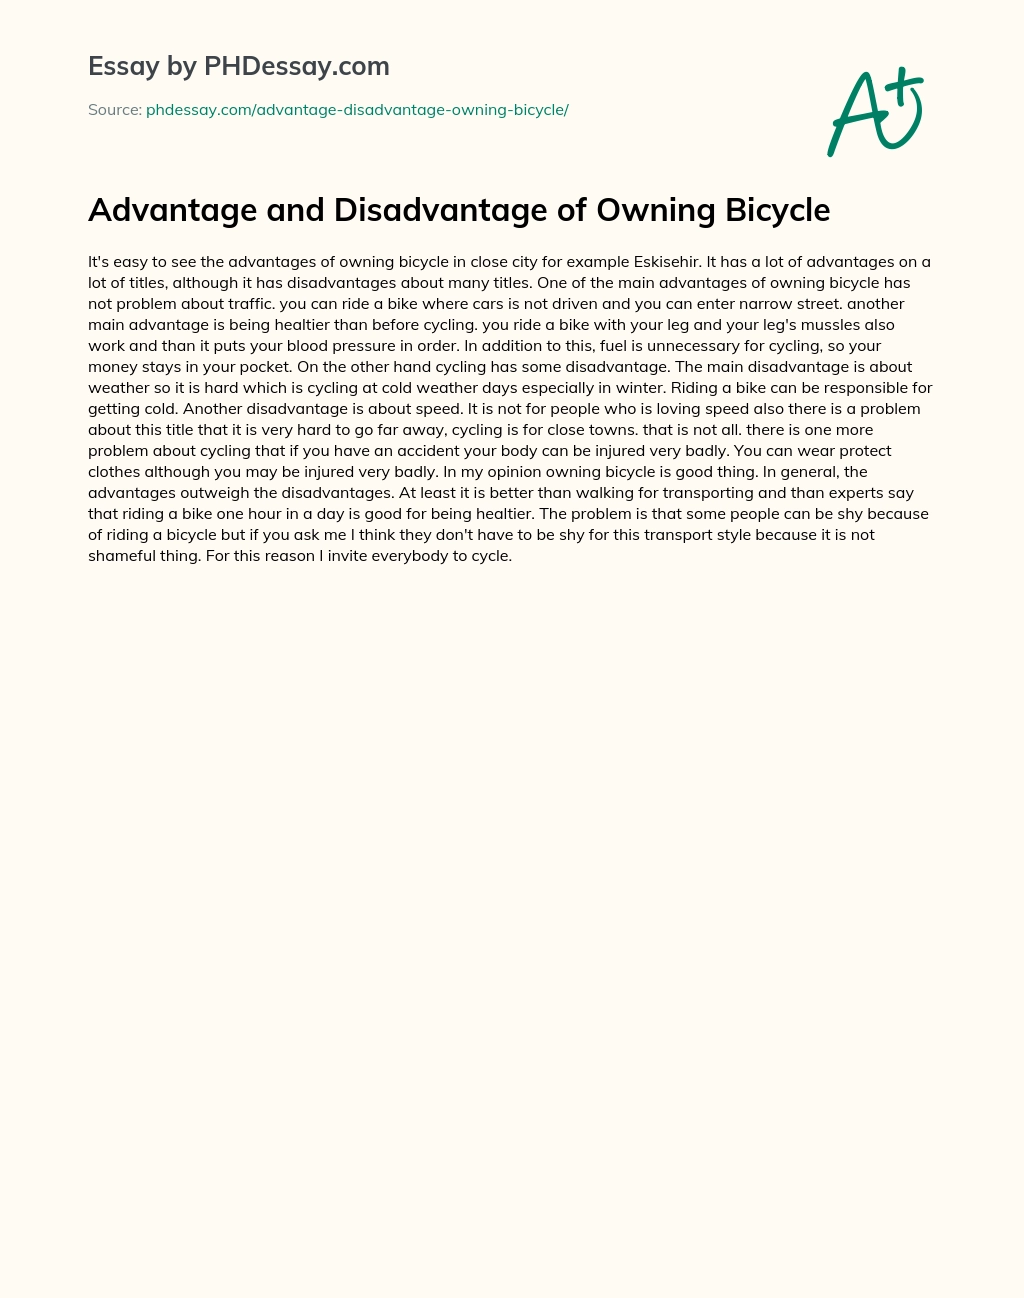 Advantage and Disadvantage of Owning Bicycle essay